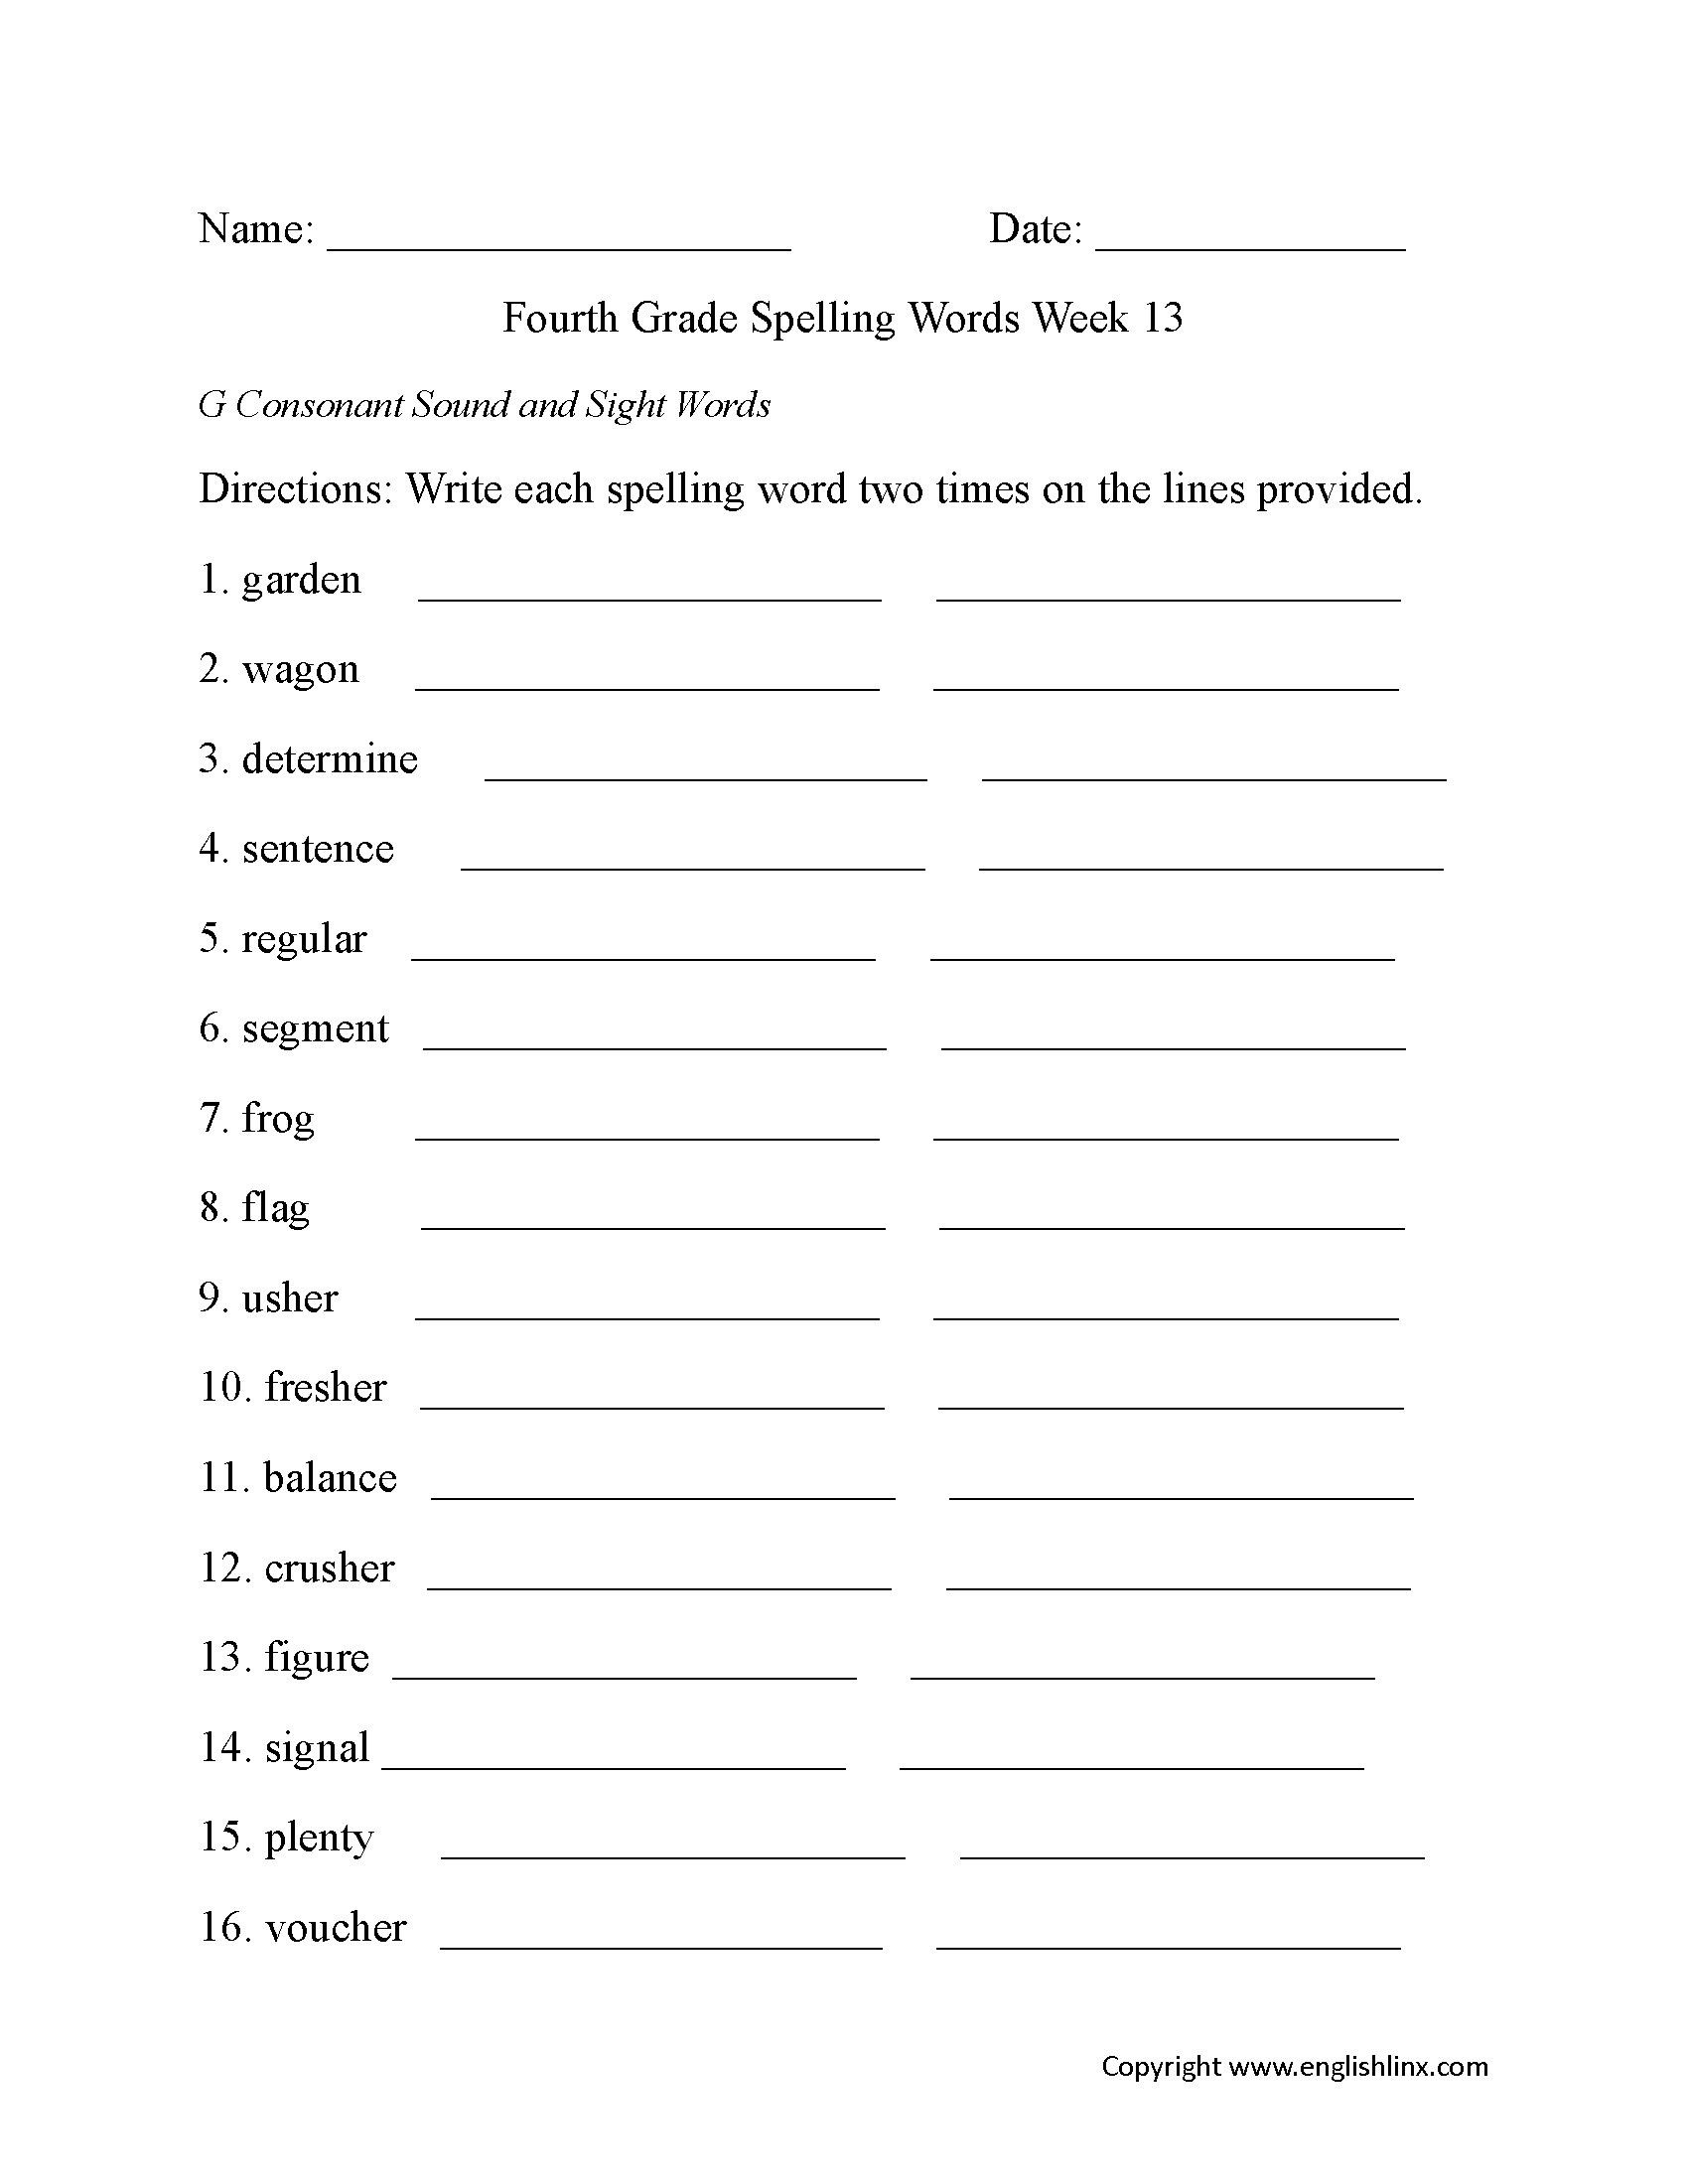 multiple-meaning-word-graphic-organizer-worksheet-free-esl-free-printable-multiple-meaning